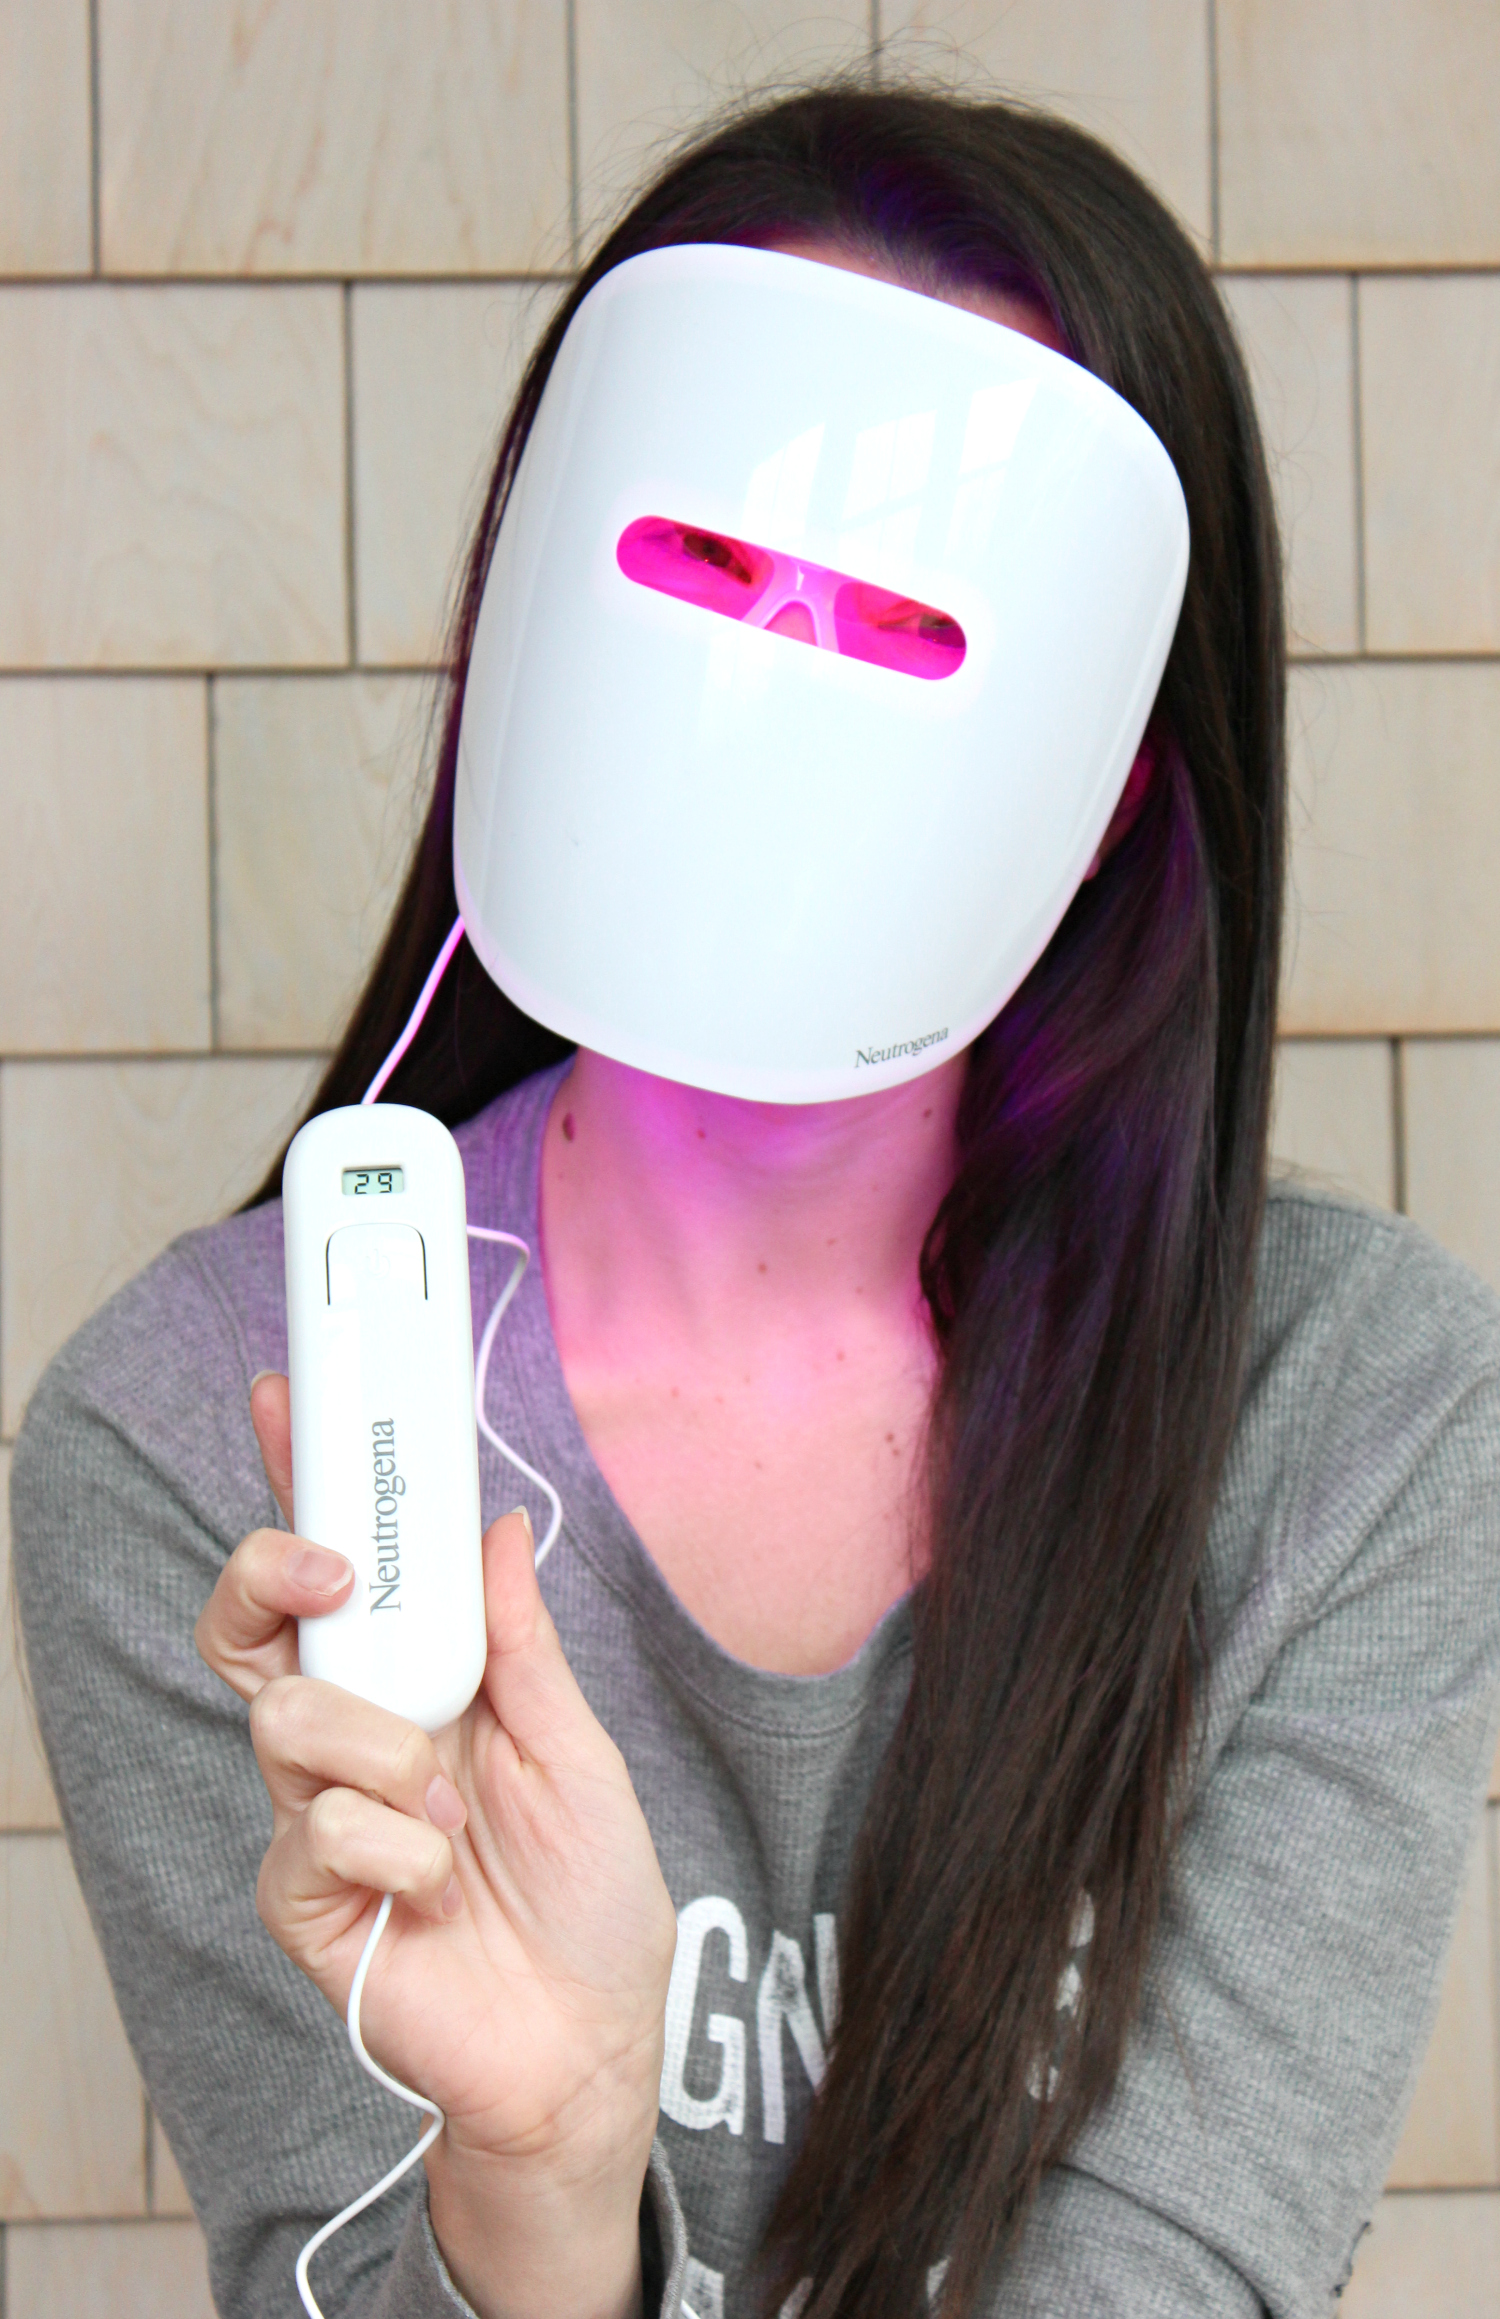 Testing out the power of light therapy to treat breakouts with the new Neutrogena Light Therapy Acne Mask